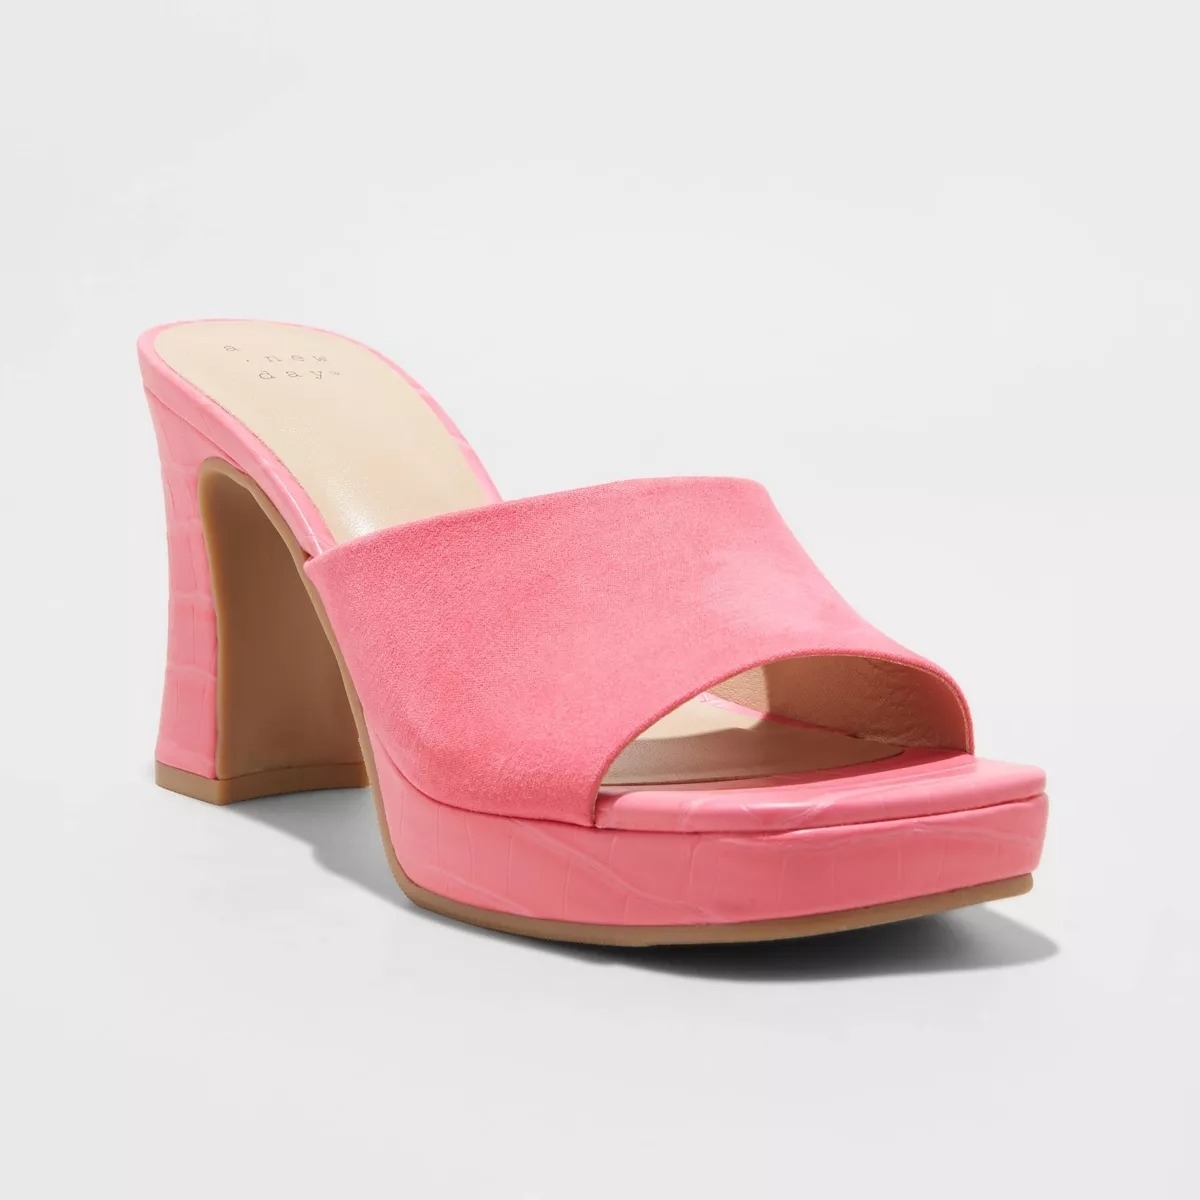 pink mule heels with open toes